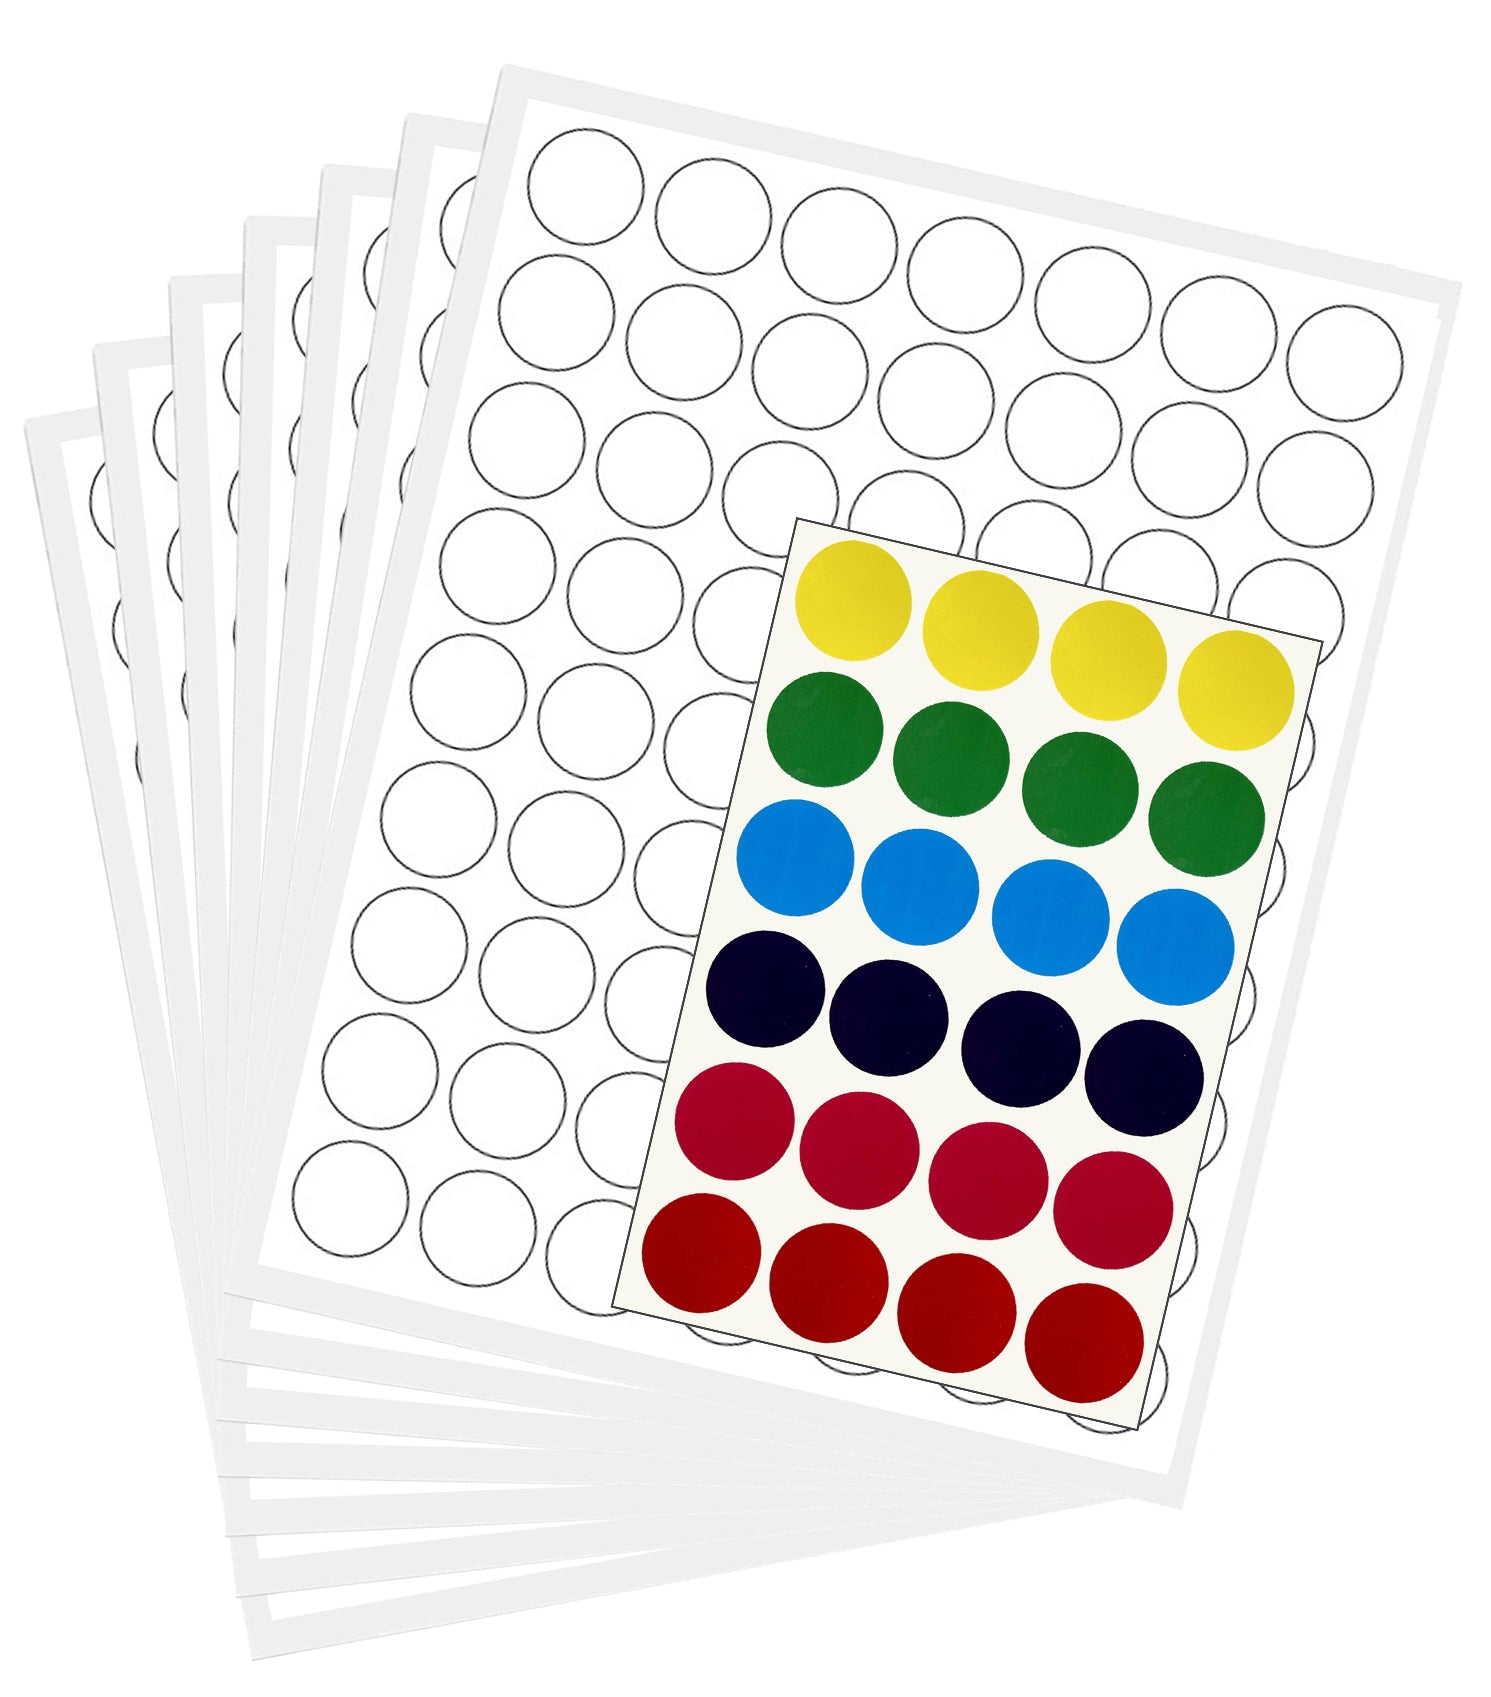 Printable Sticker Paper for Inkjet & Laser Printer -Dries Quickly